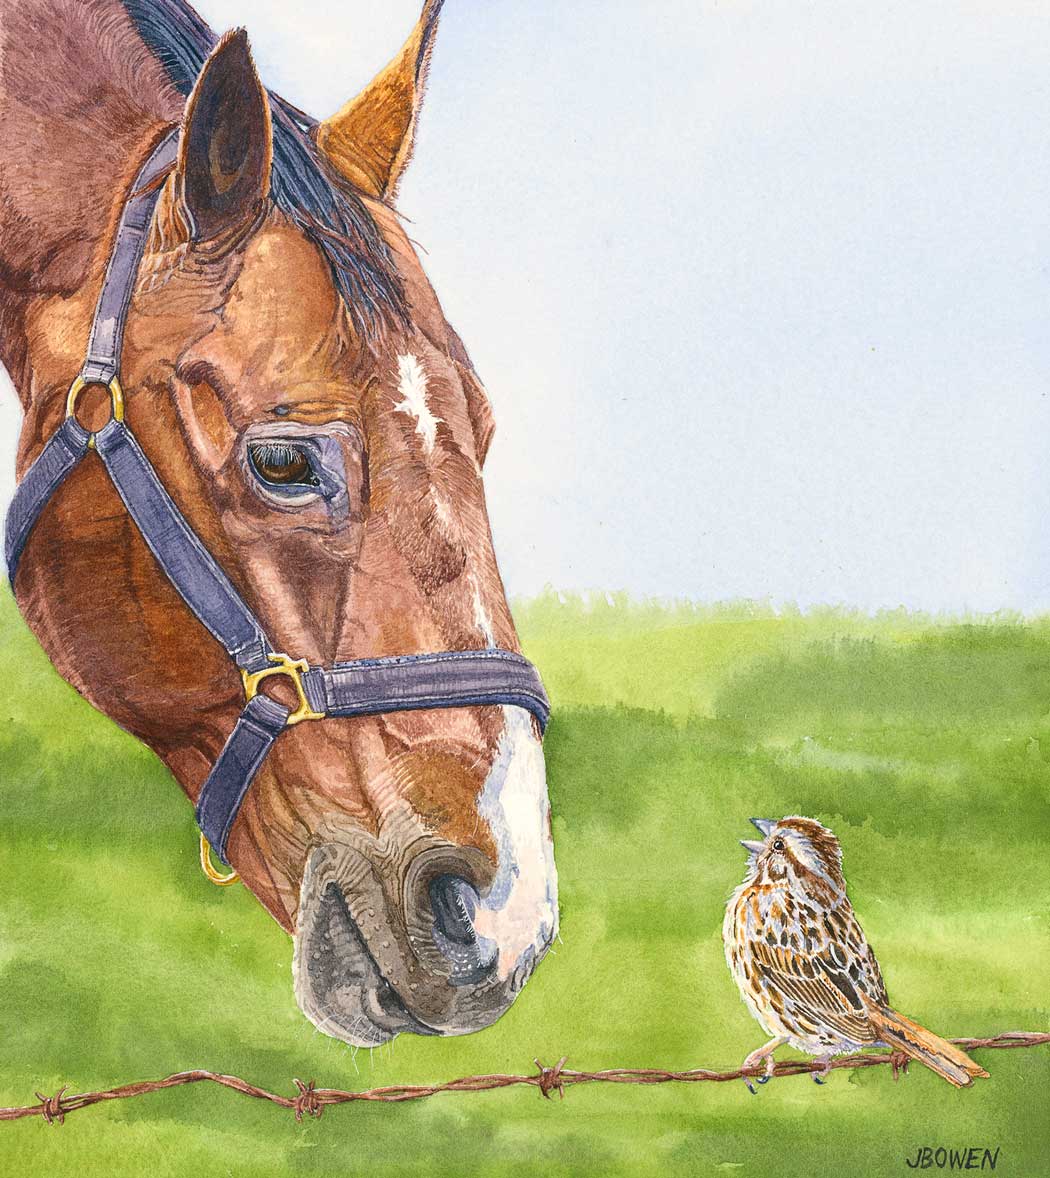 “Neighbours – Horse and Song Sparrow”